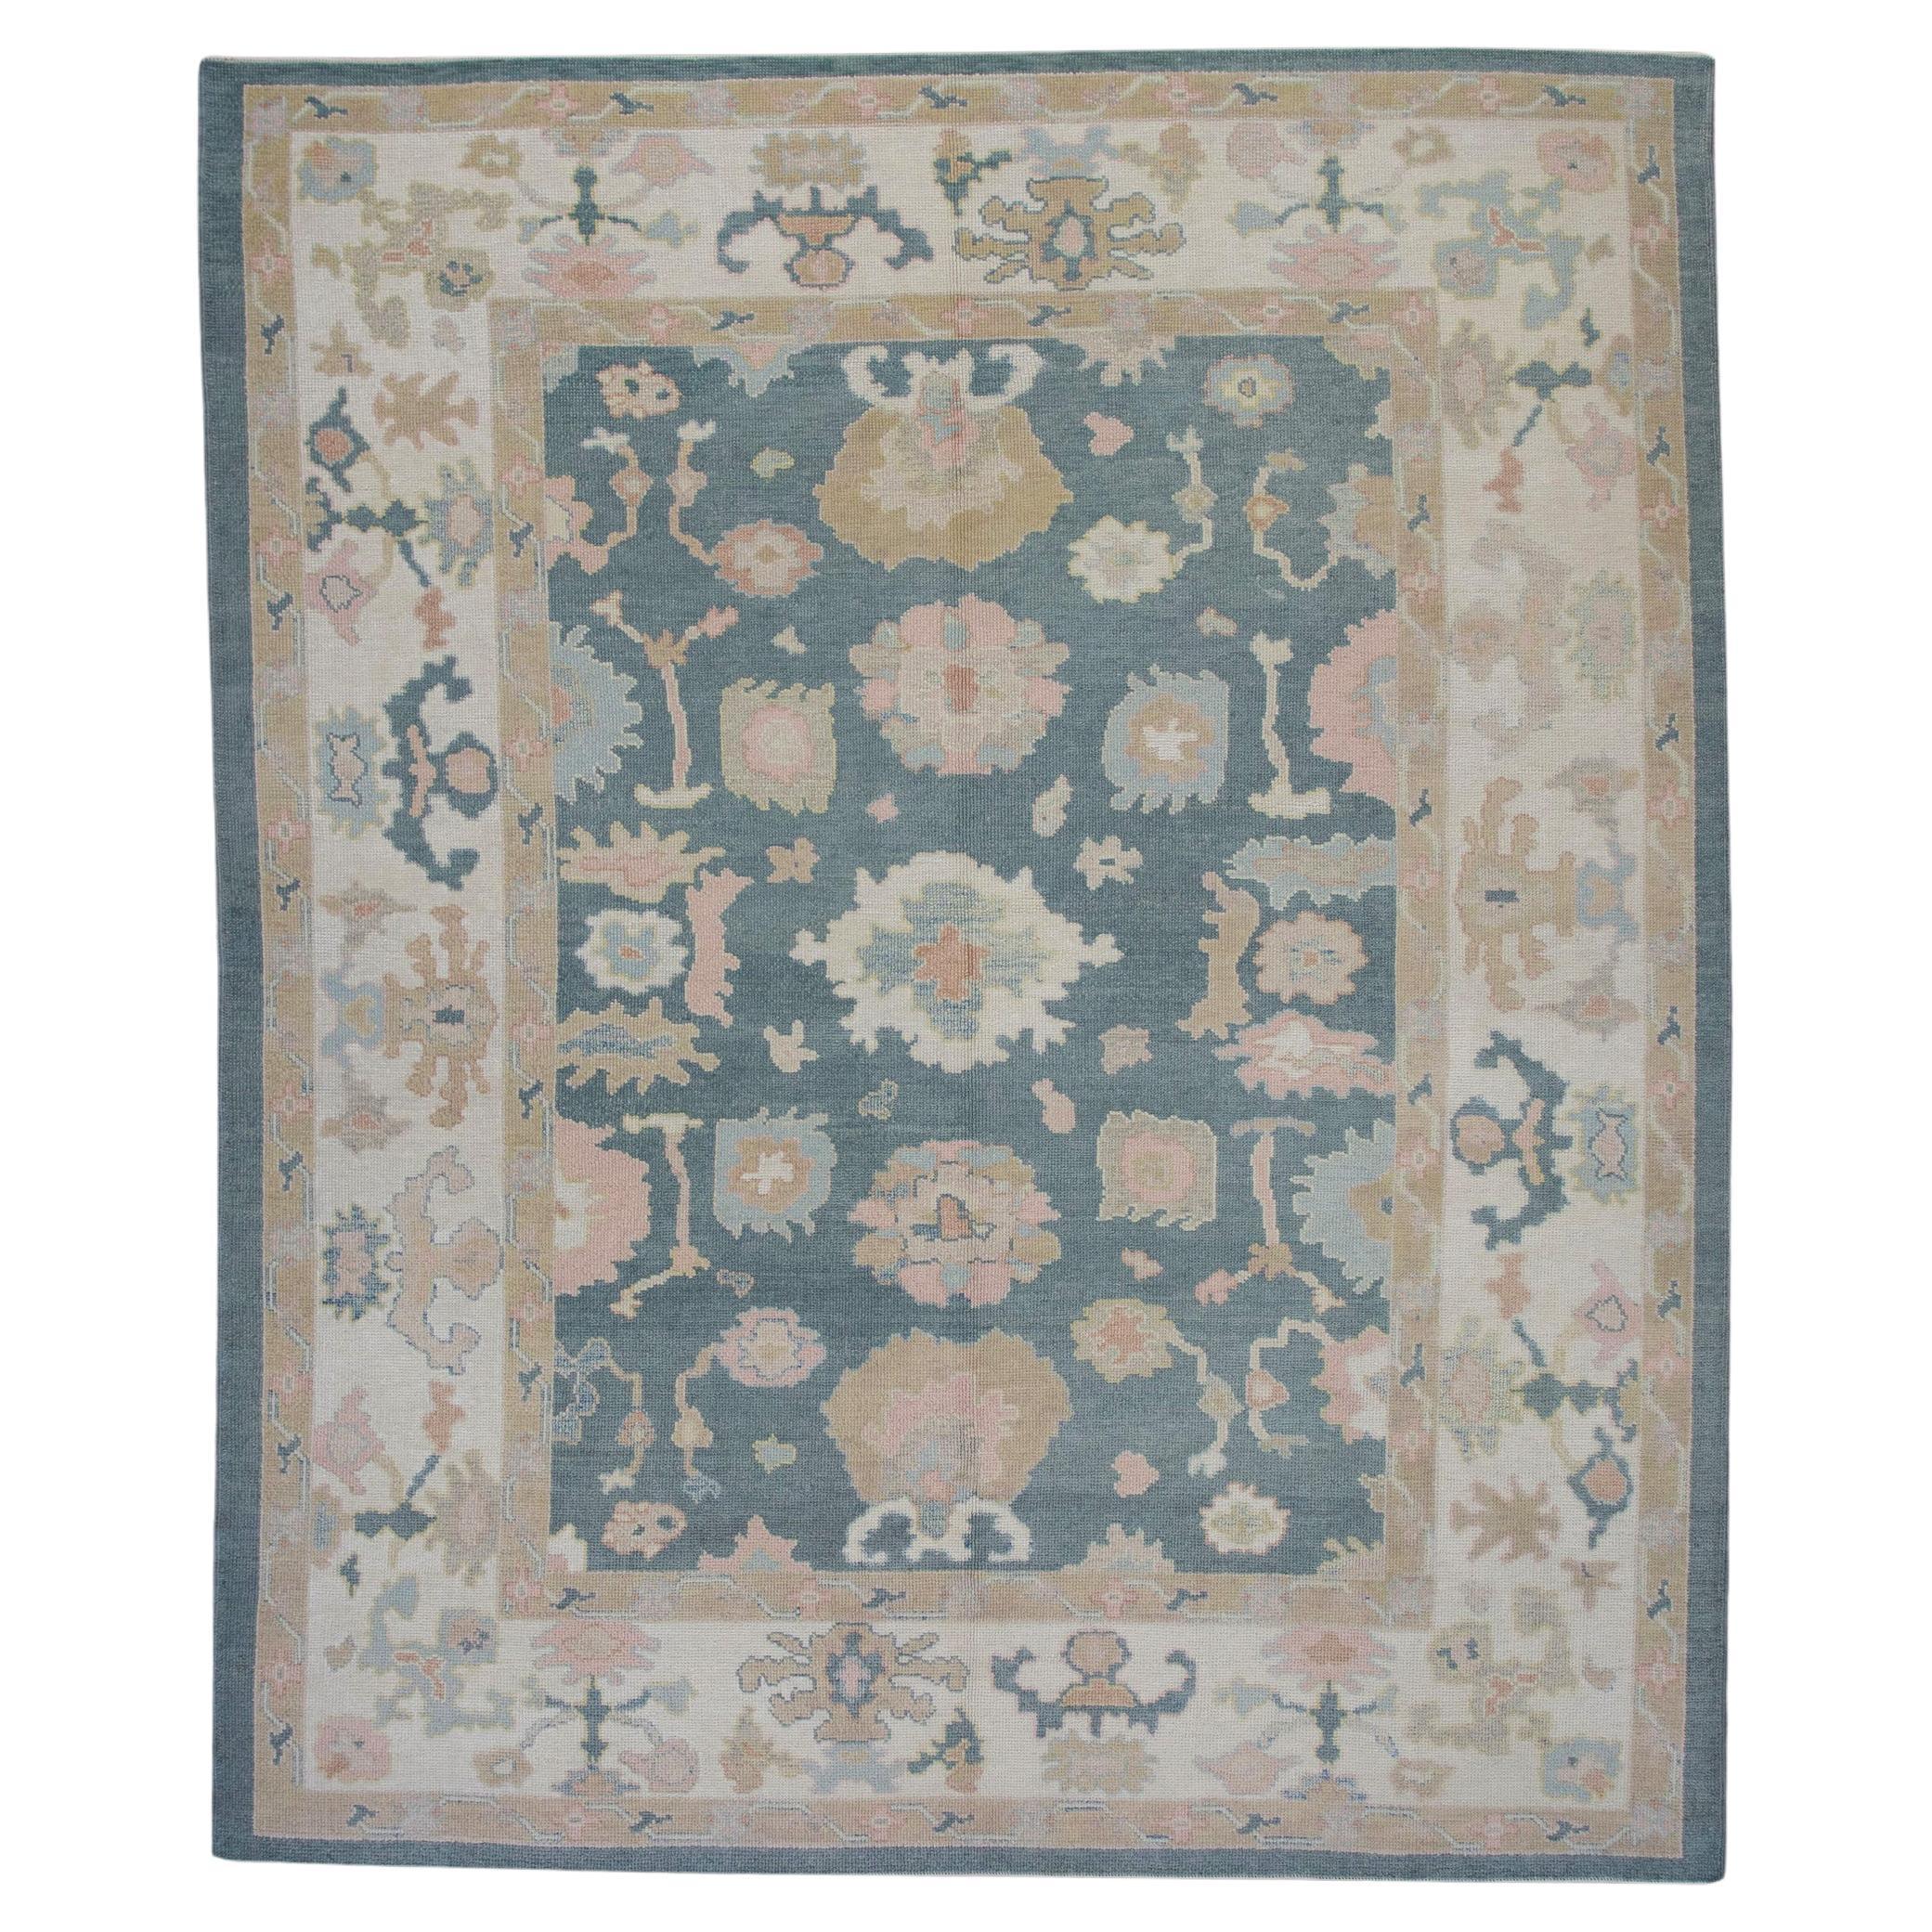 Blue and Pink Handwoven Wool Floral Pattern Turkish Oushak Rug 8'7" x 9'10"